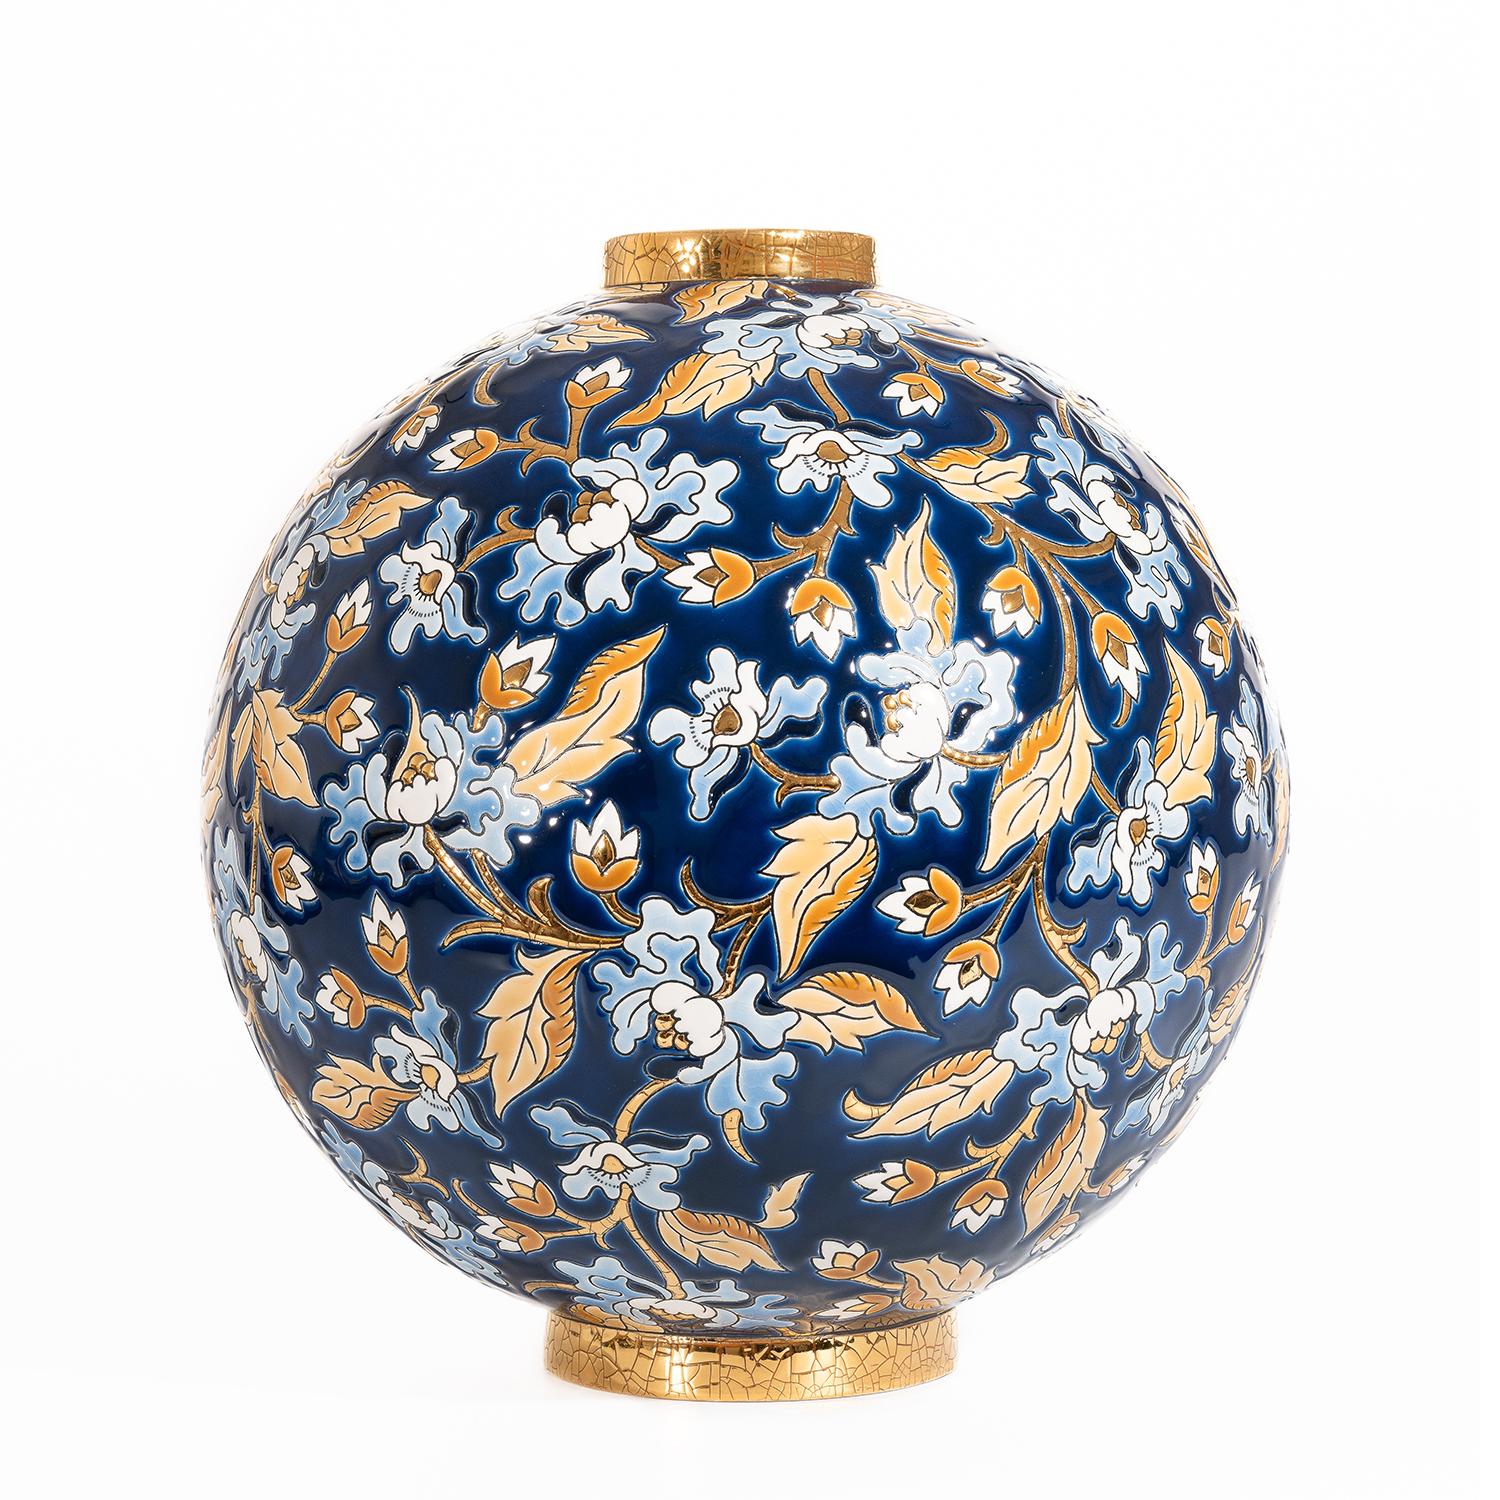 Vase White and Blue Flowers all in enameled earthenware,
Emaux de Longwy made in France, with 24 karat gold plated.